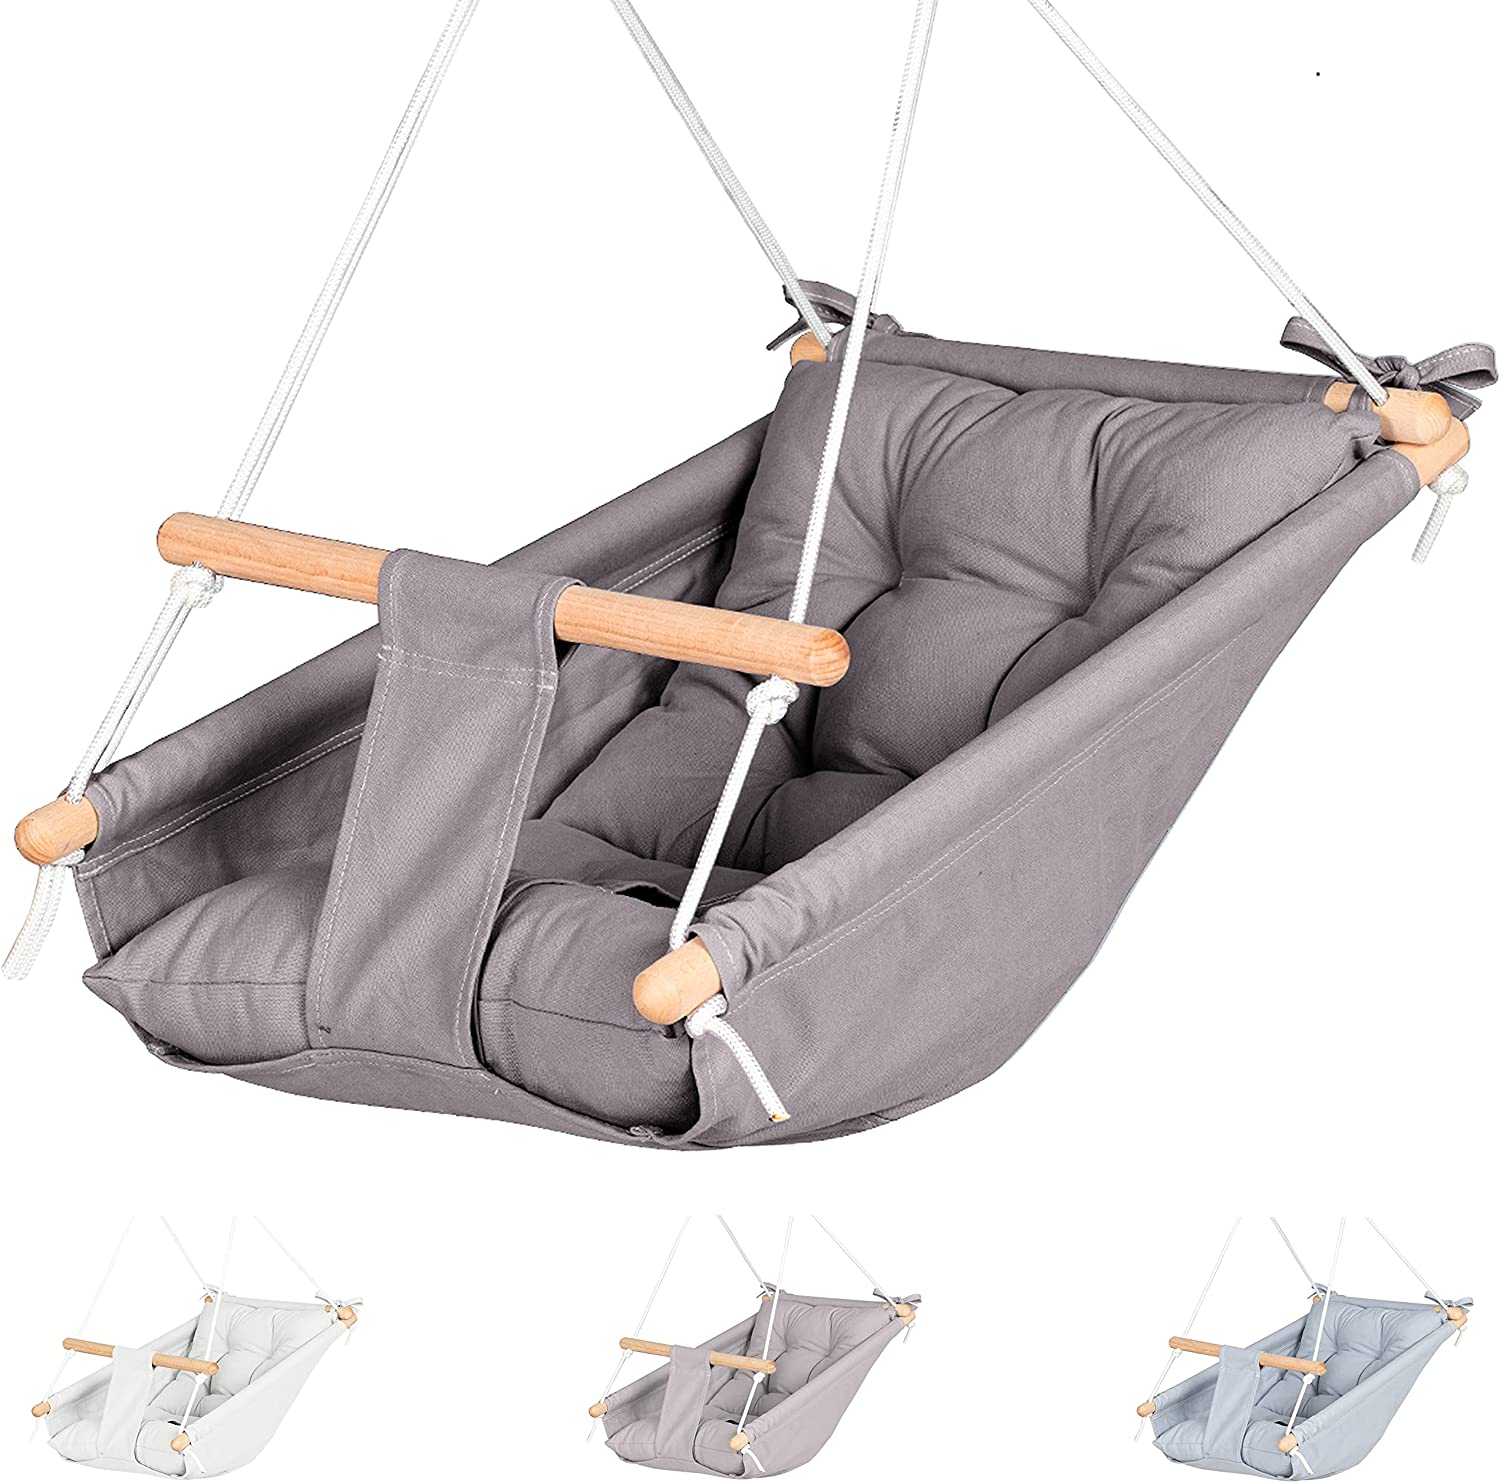 Cateam Canvas Baby Swing Grey Wooden Hanging Swing Seat Chair for Baby with Safety Belt and mounting Hardware Baby Hammock Chair Birthday Gift. 